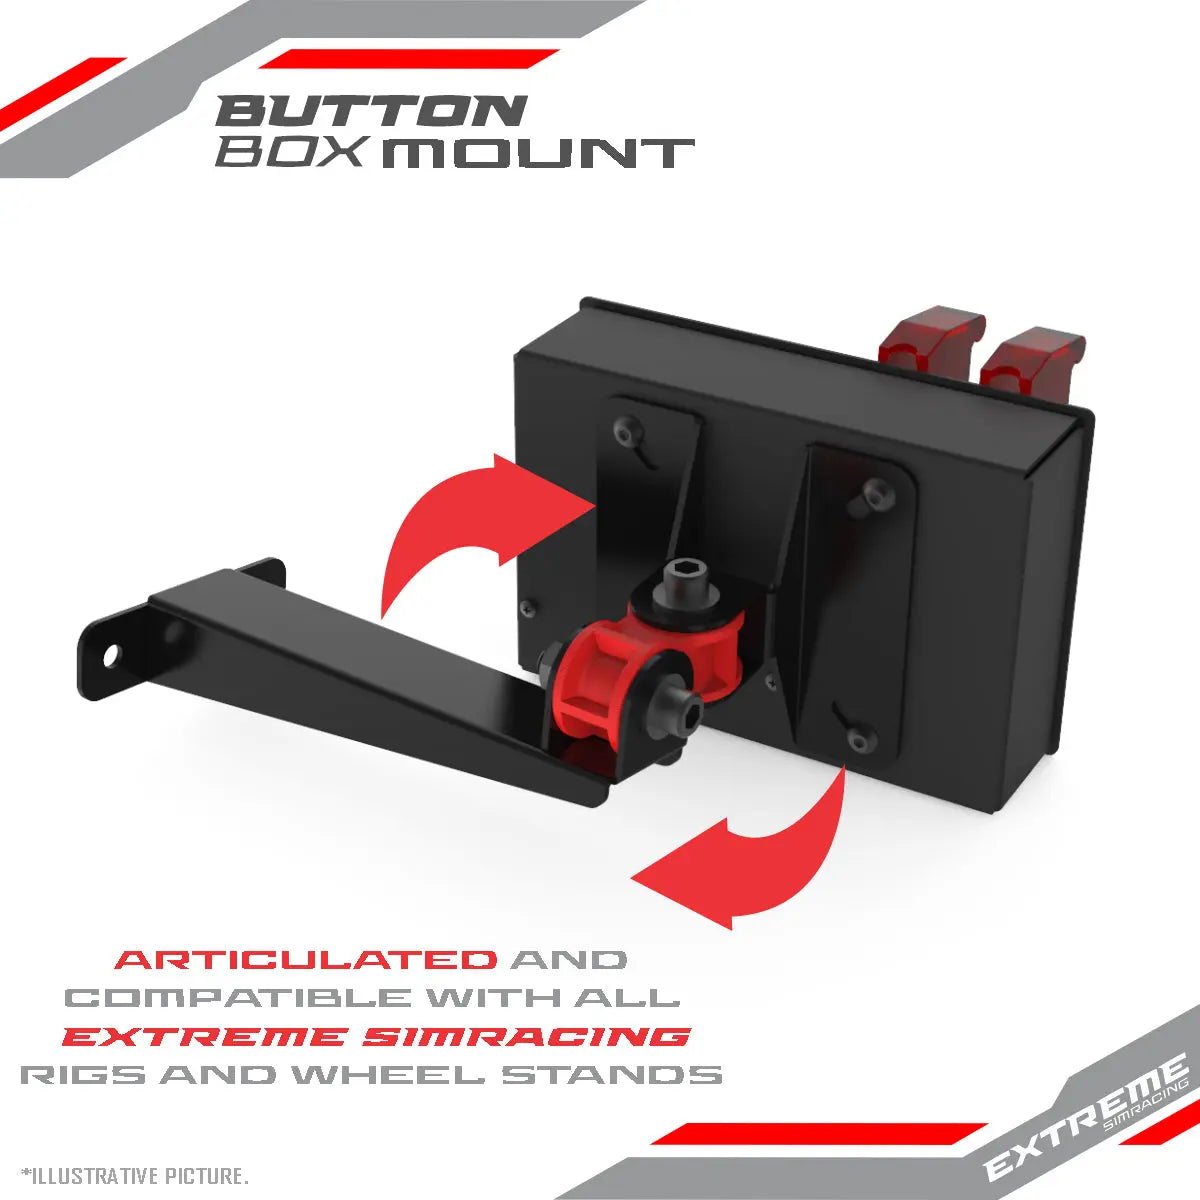 BUTTON BOX EXTREME SIMRACING (MOUNT BRACKET INCLUDED) – Extreme